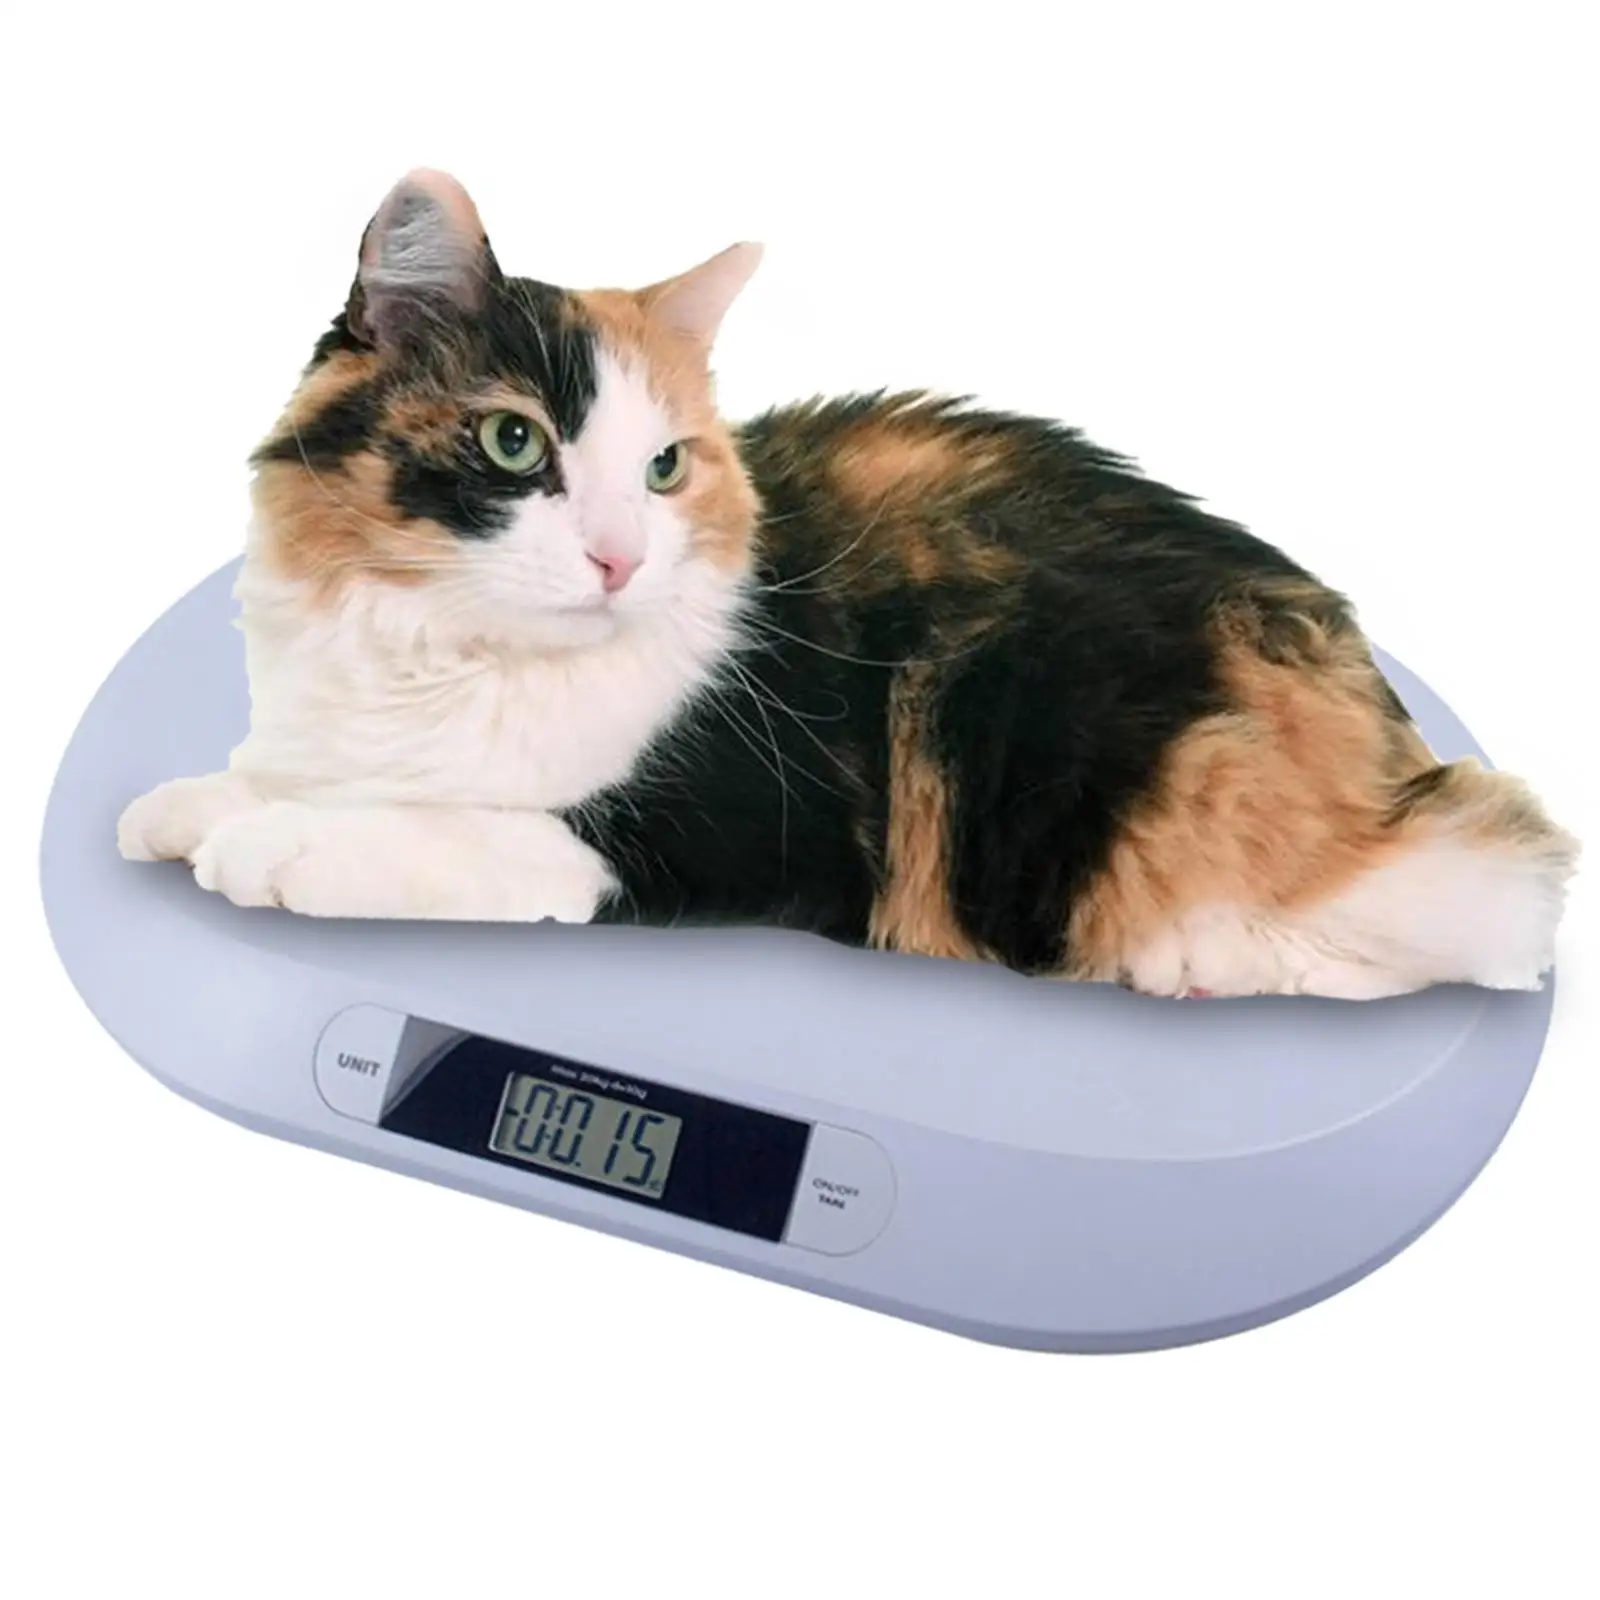 Digital Infant Scale 44.1lb Capacity Portable Comfort Multifunction Accurate Health Scale for Puppy Animals Cats Toddlers